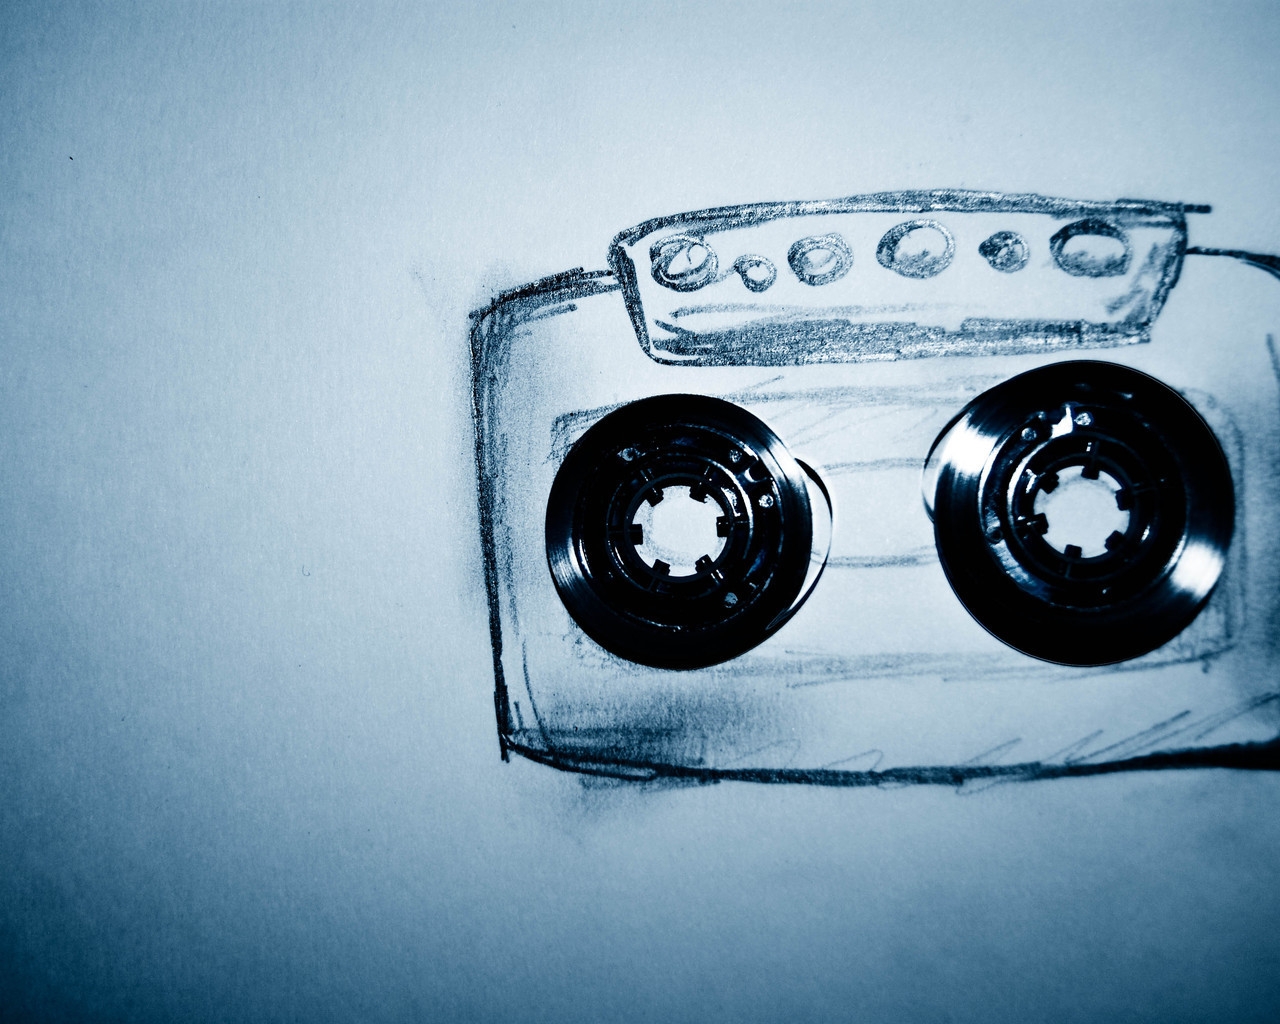 Cassette Drawings for 1280 x 1024 resolution